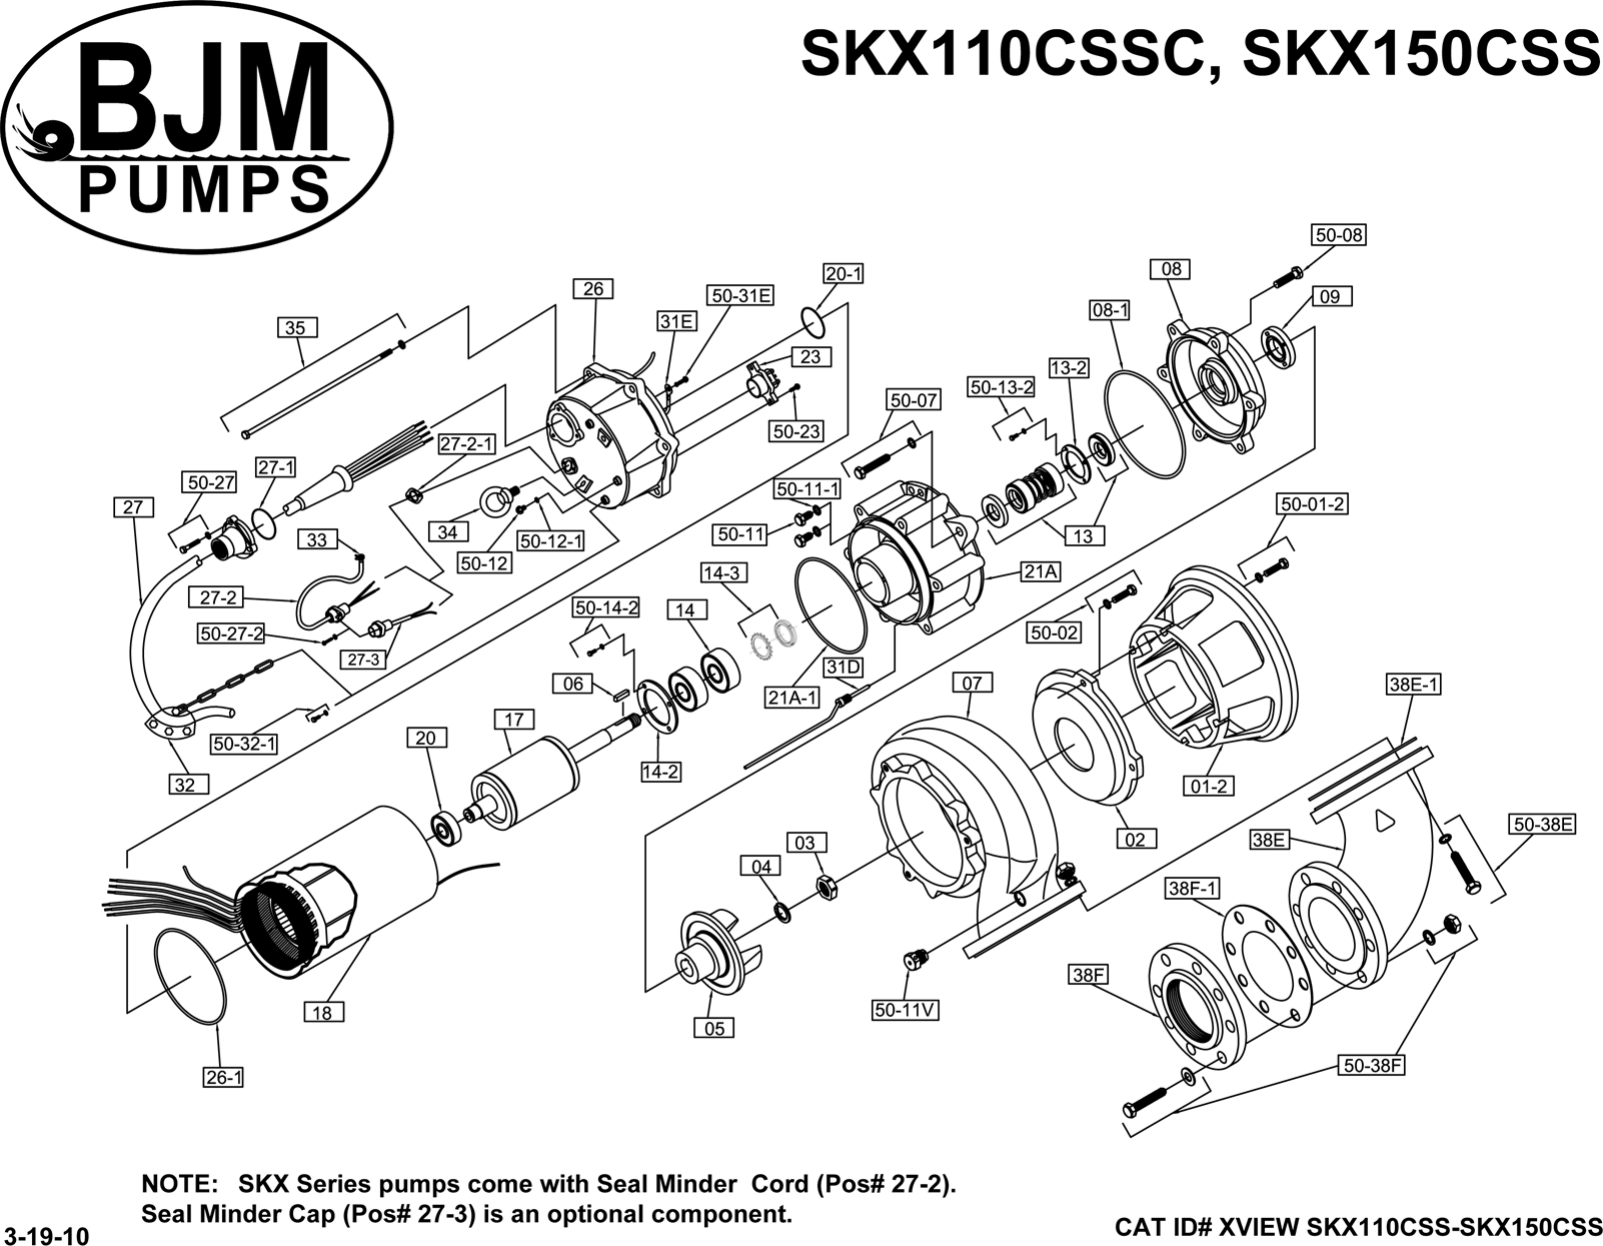 Page 5 of 5 - 136208 6 Bjm Skx Series Exploded View User Manual